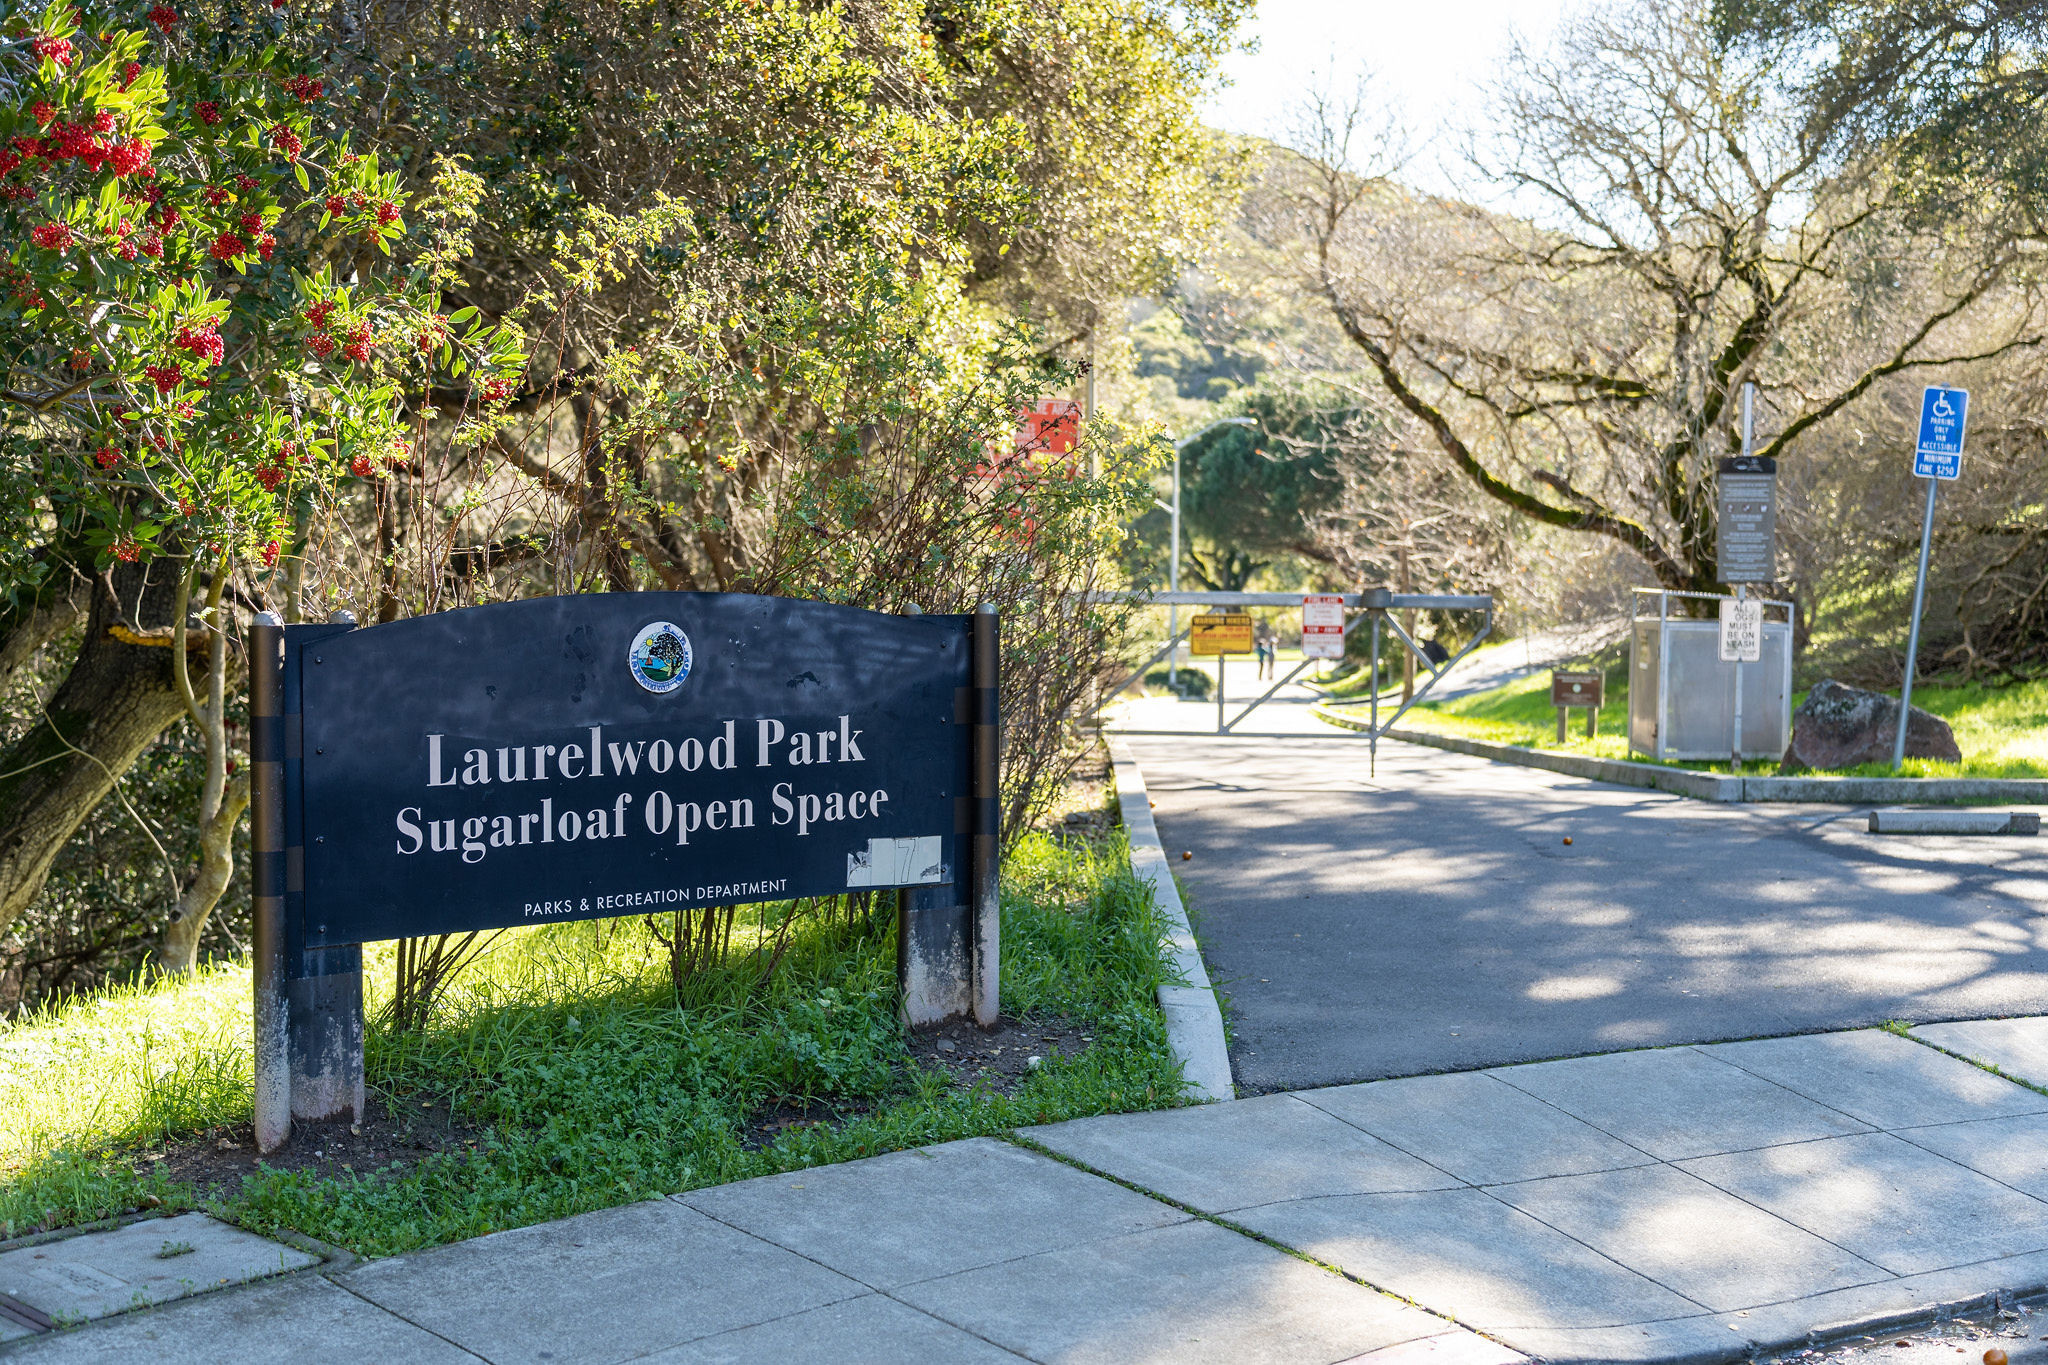 Laurelwood Park Sugarloaf Open Space signage on a black background in San Mateo.